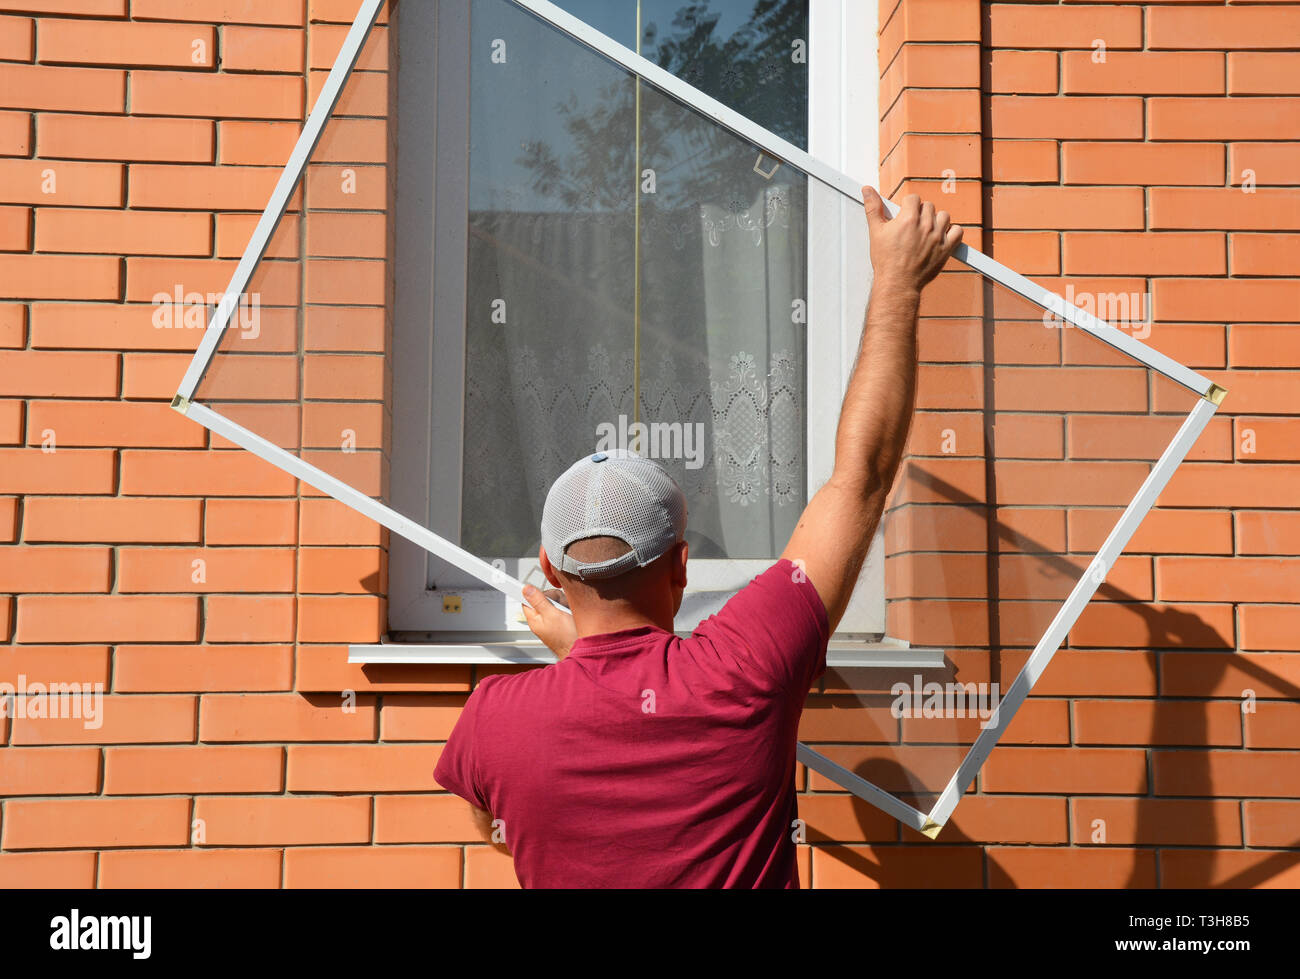 Contractor installing mosquito wire screen on house window to protect from insects. Mosquito wire screen installation. Stock Photo